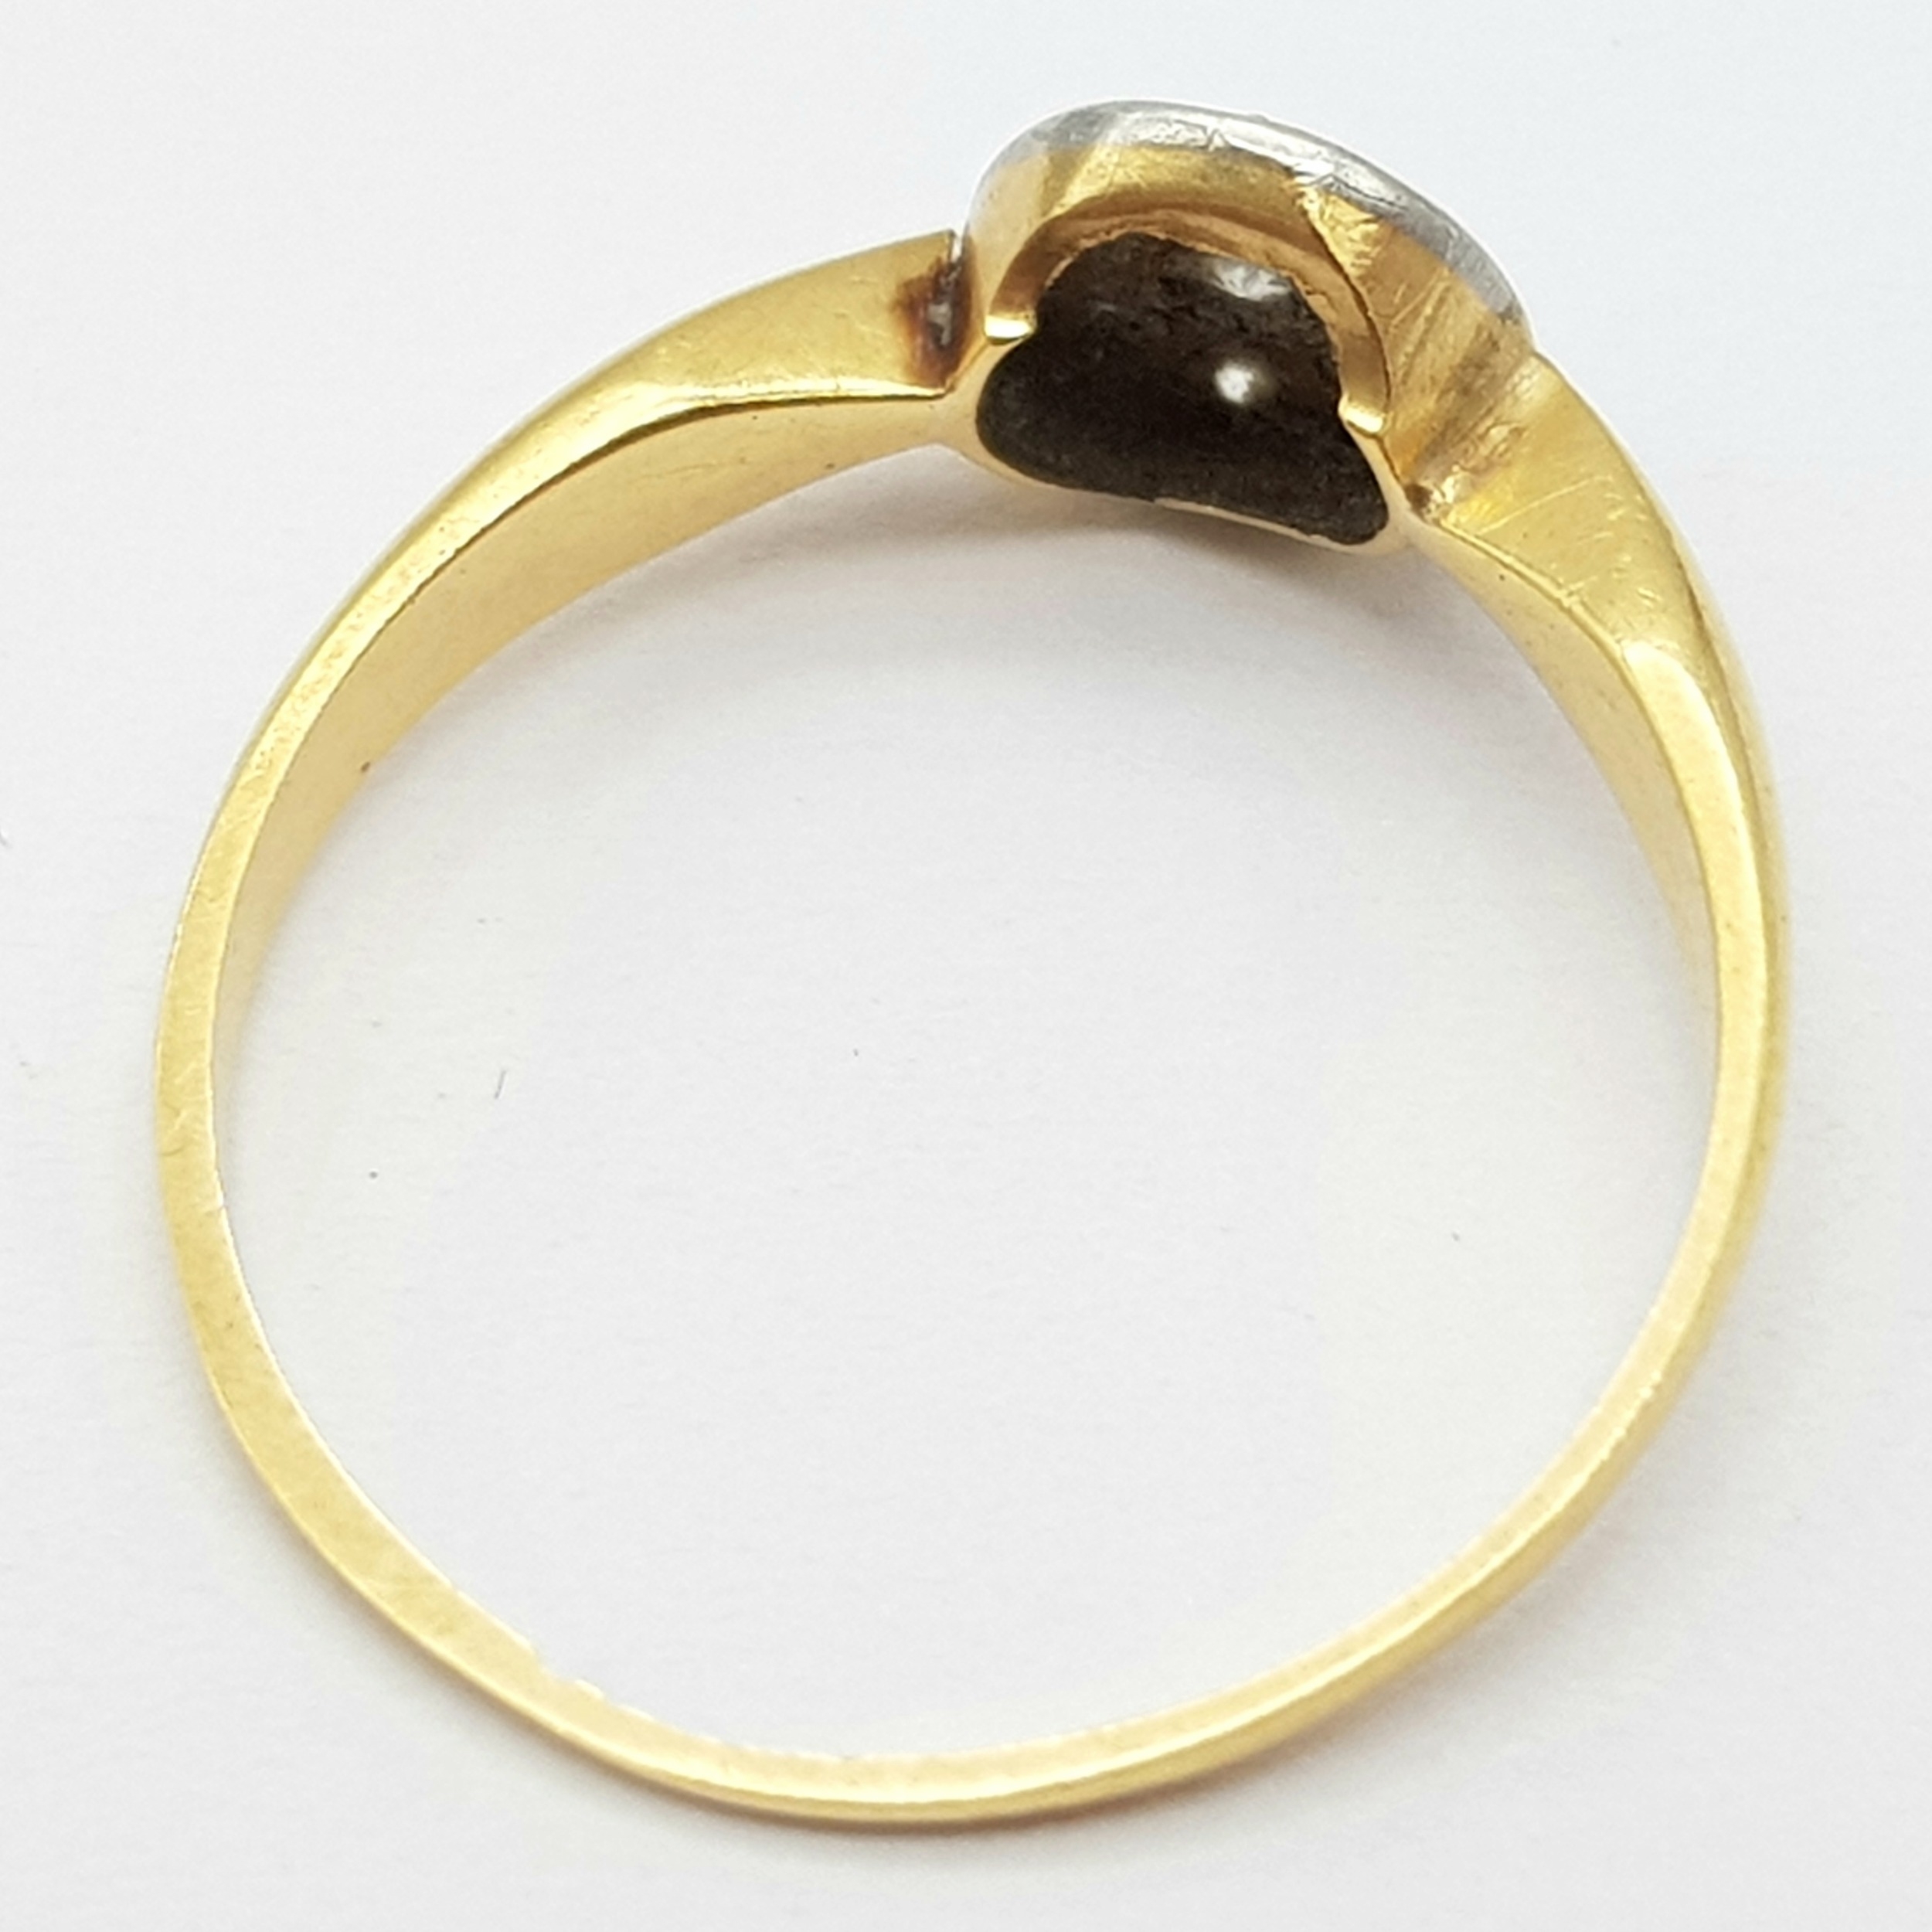 A Delicate Vintage 18K Gold Diamond Cluster Ring. Size L. 1.8g total weight. - Image 3 of 4